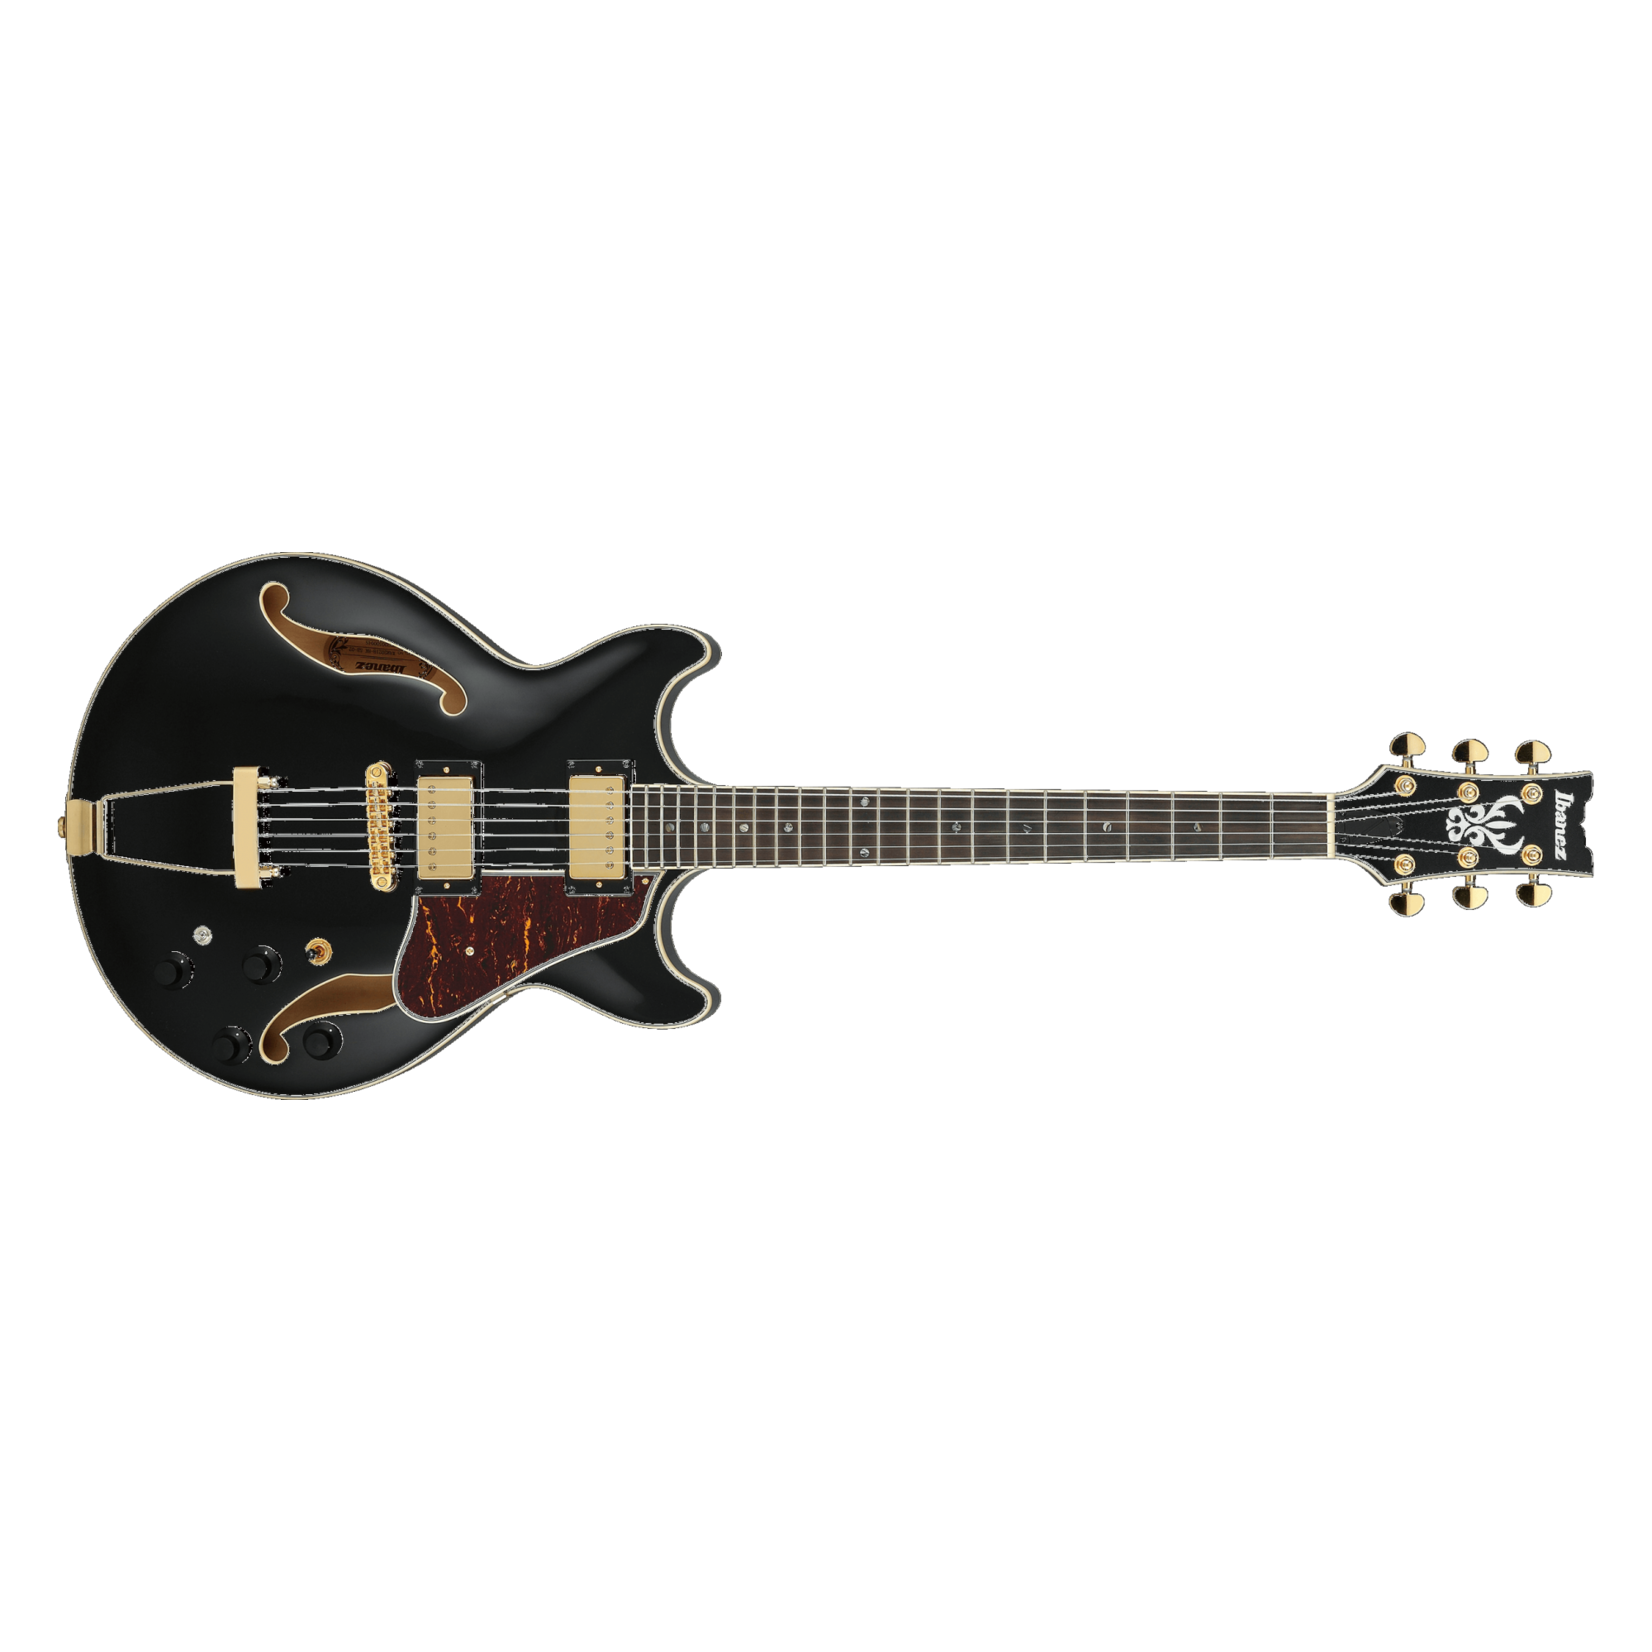 Ibanez AMH90 Artcore Expressionist Hollowbody Electric Guitar - Black